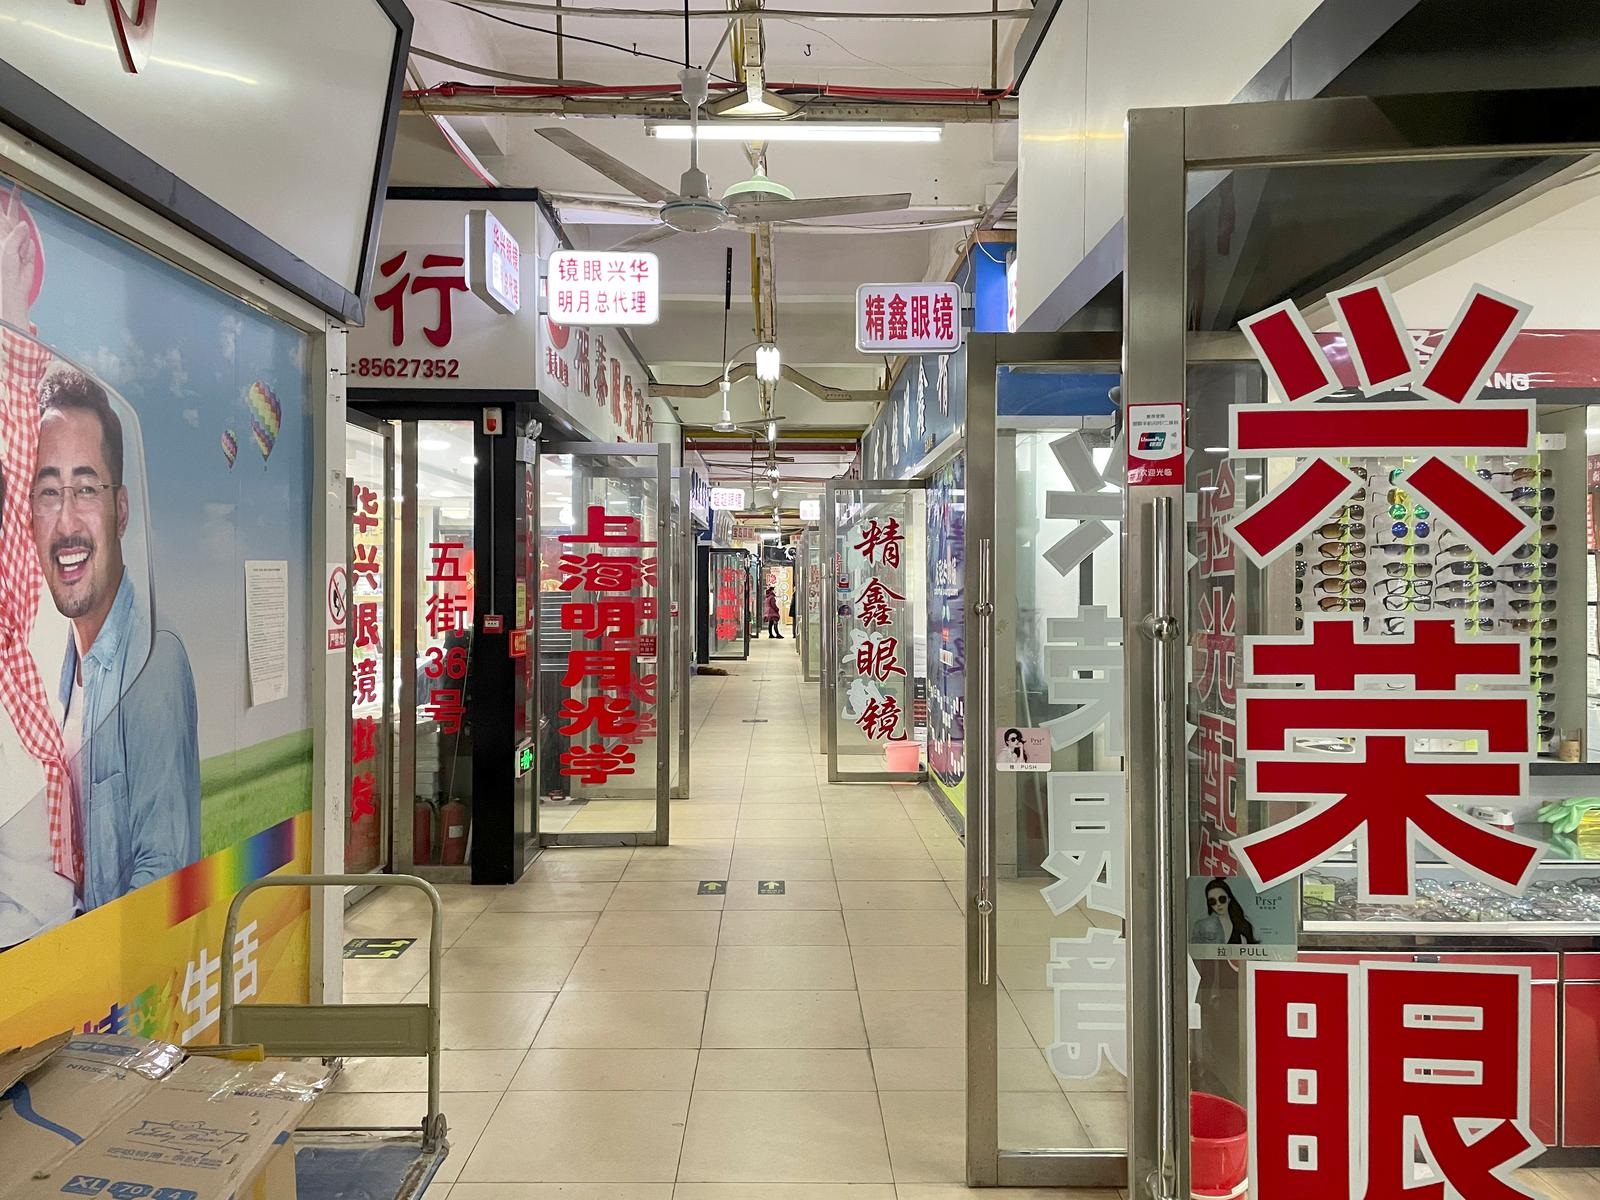 One year on, Wuhan market at epicentre of virus outbreak remains barricaded and empty